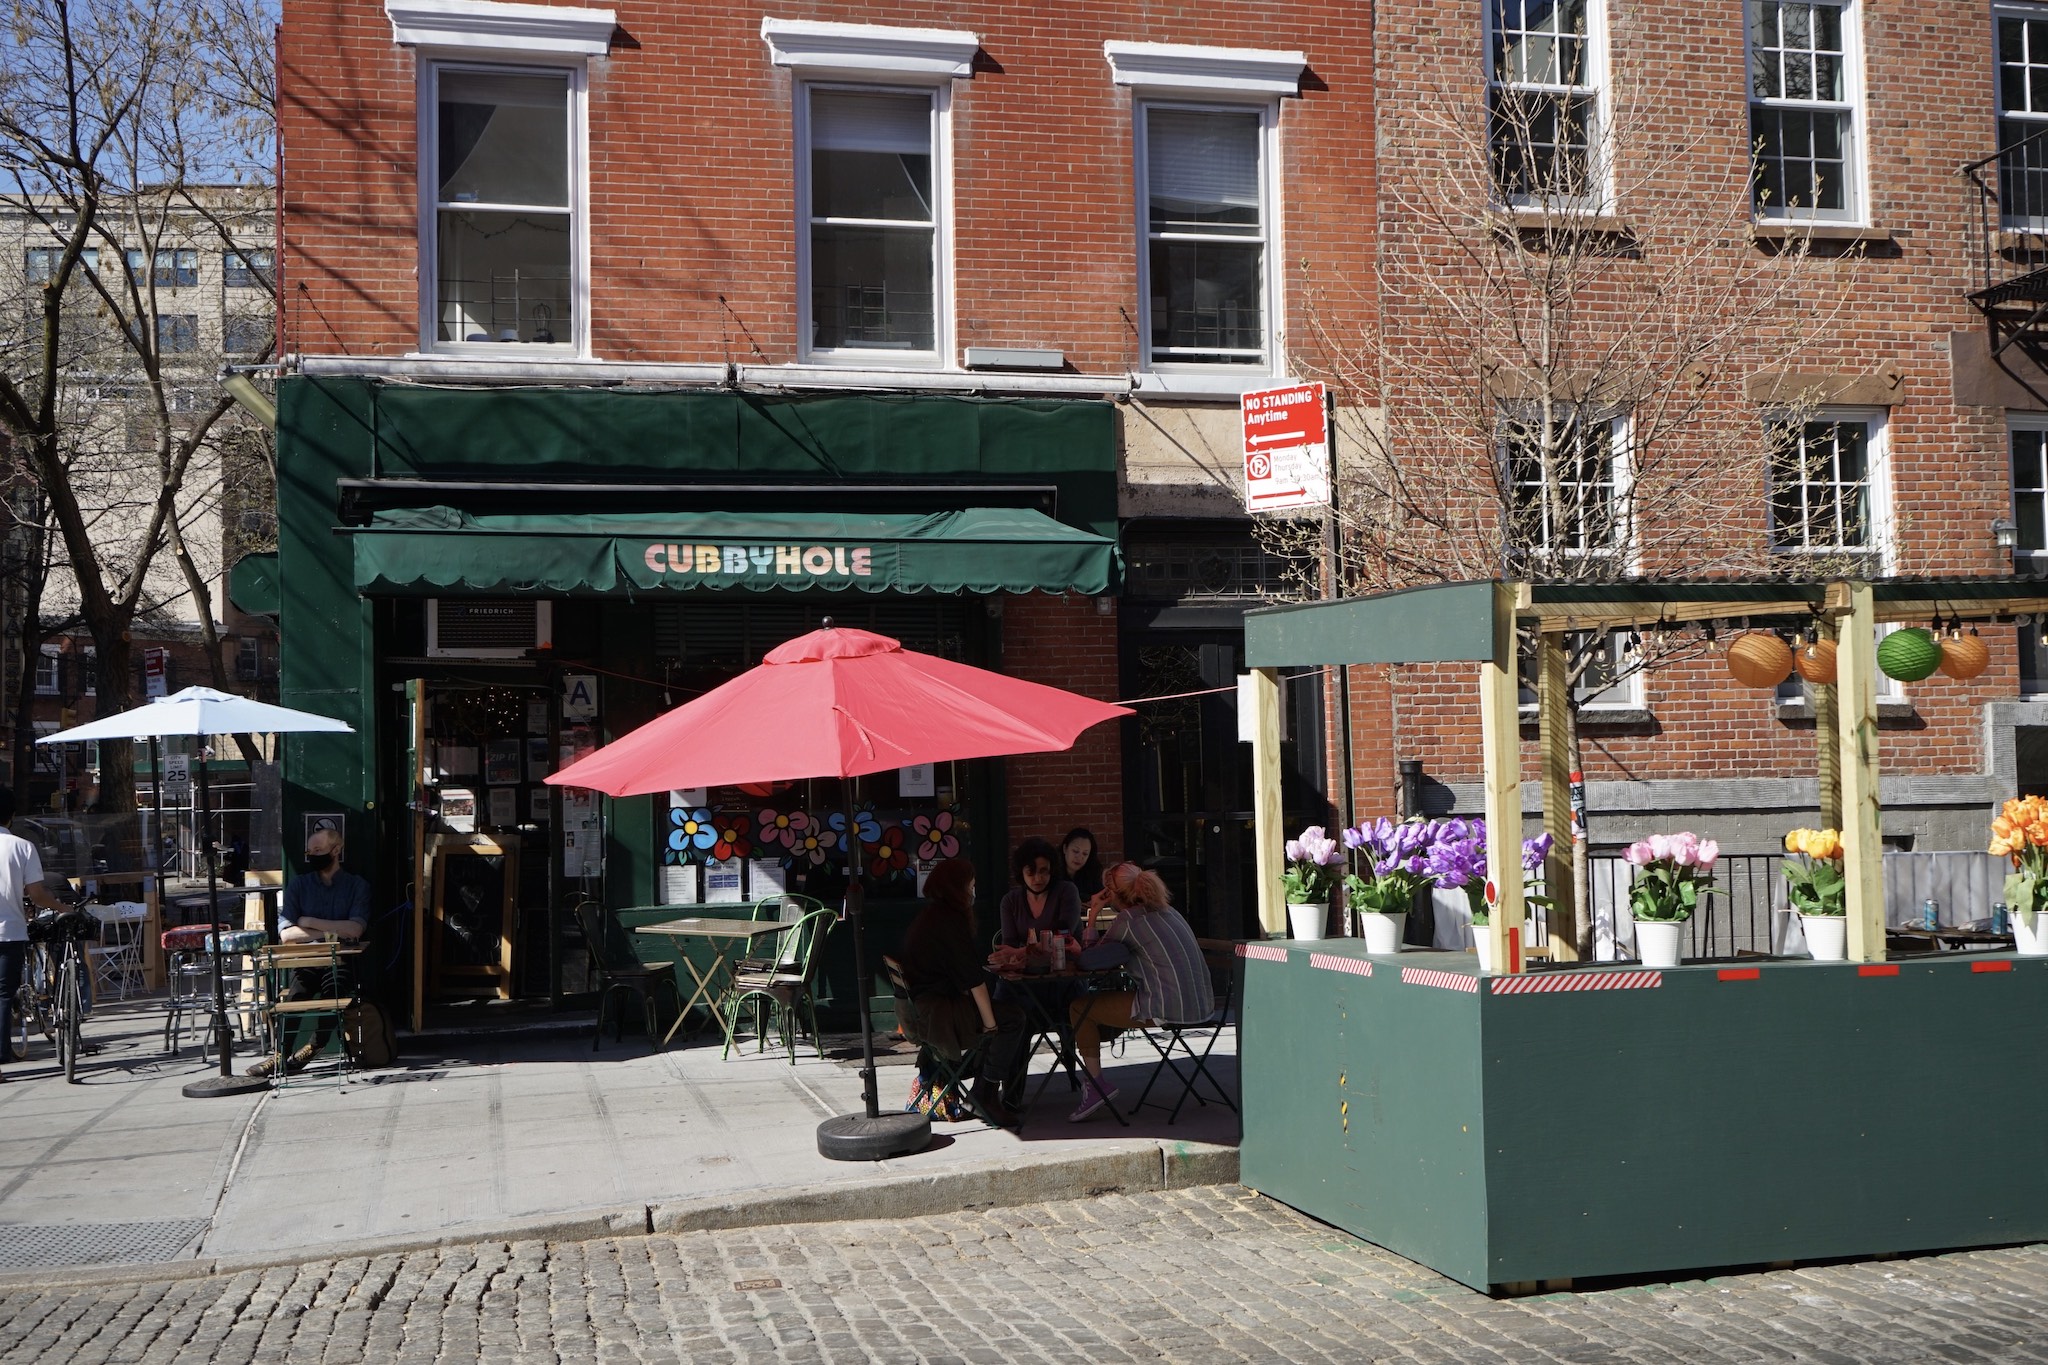 A green-painted exterior of a bar with red and white umbrellas unfurled over tables outside. A green plywood patio sits on the cobblestone street next to the bar entrance.